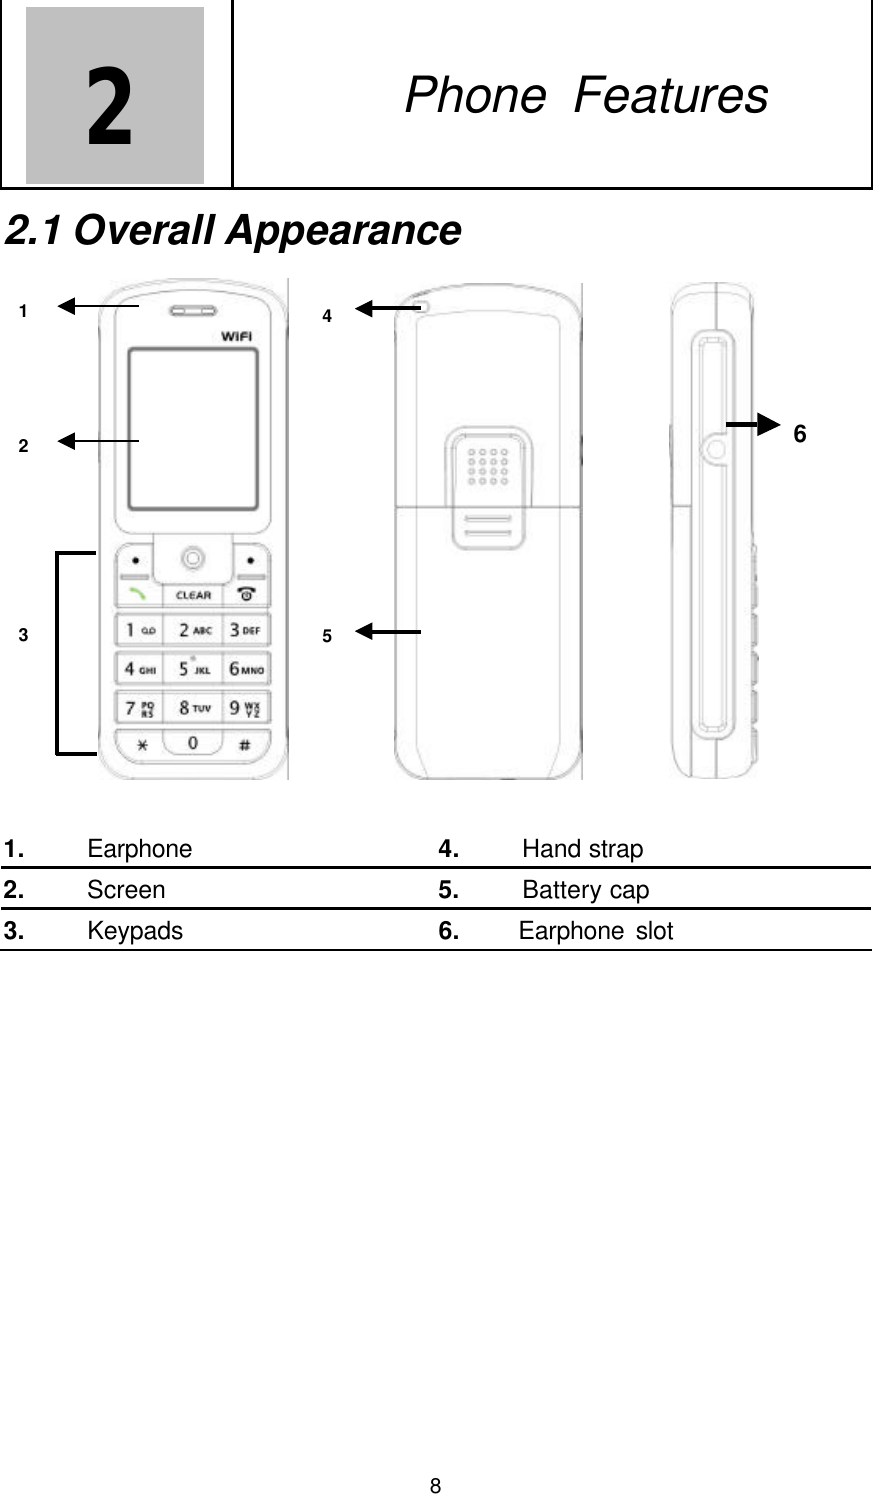  8 2   2. Phone Features 2.1 Overall Appearance  1 2 3  4 5         6   1.     Earphone 4.     Hand strap 2.     Screen 5.     Battery cap 3.     Keypads 6.     Earphone slot  